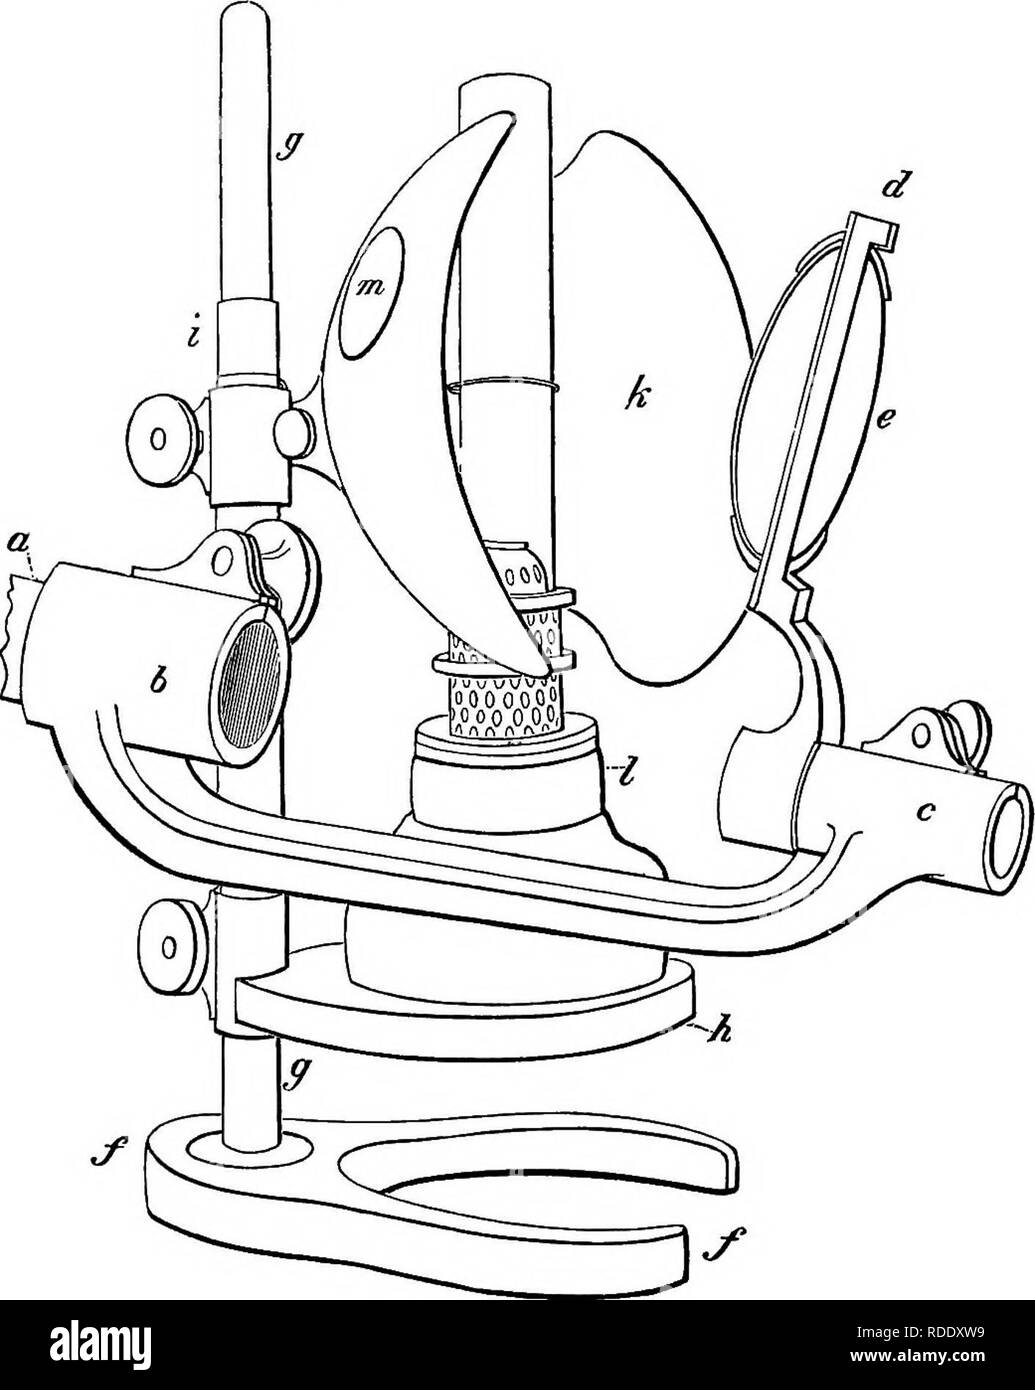 . A practical treatise on the use of the microscope, including the different methods of preparing and examining animal, vegetable, and mineral structures. Microscopes; Microscopy. 496 APPENDIX. of a circle, by turning the milled head, c; thirdly, in the addition of the apparatus for illumination placed beneath. Fig. 269. the stage, all of which is fitted into the bar, b, and may be moved up and down by a rack and pinion, which is obscured by the part in which the dove-tailed slides move; to this bar, b, is fixed the tube, a a, into which the various condensers and illuminators are adapted, and Stock Photo